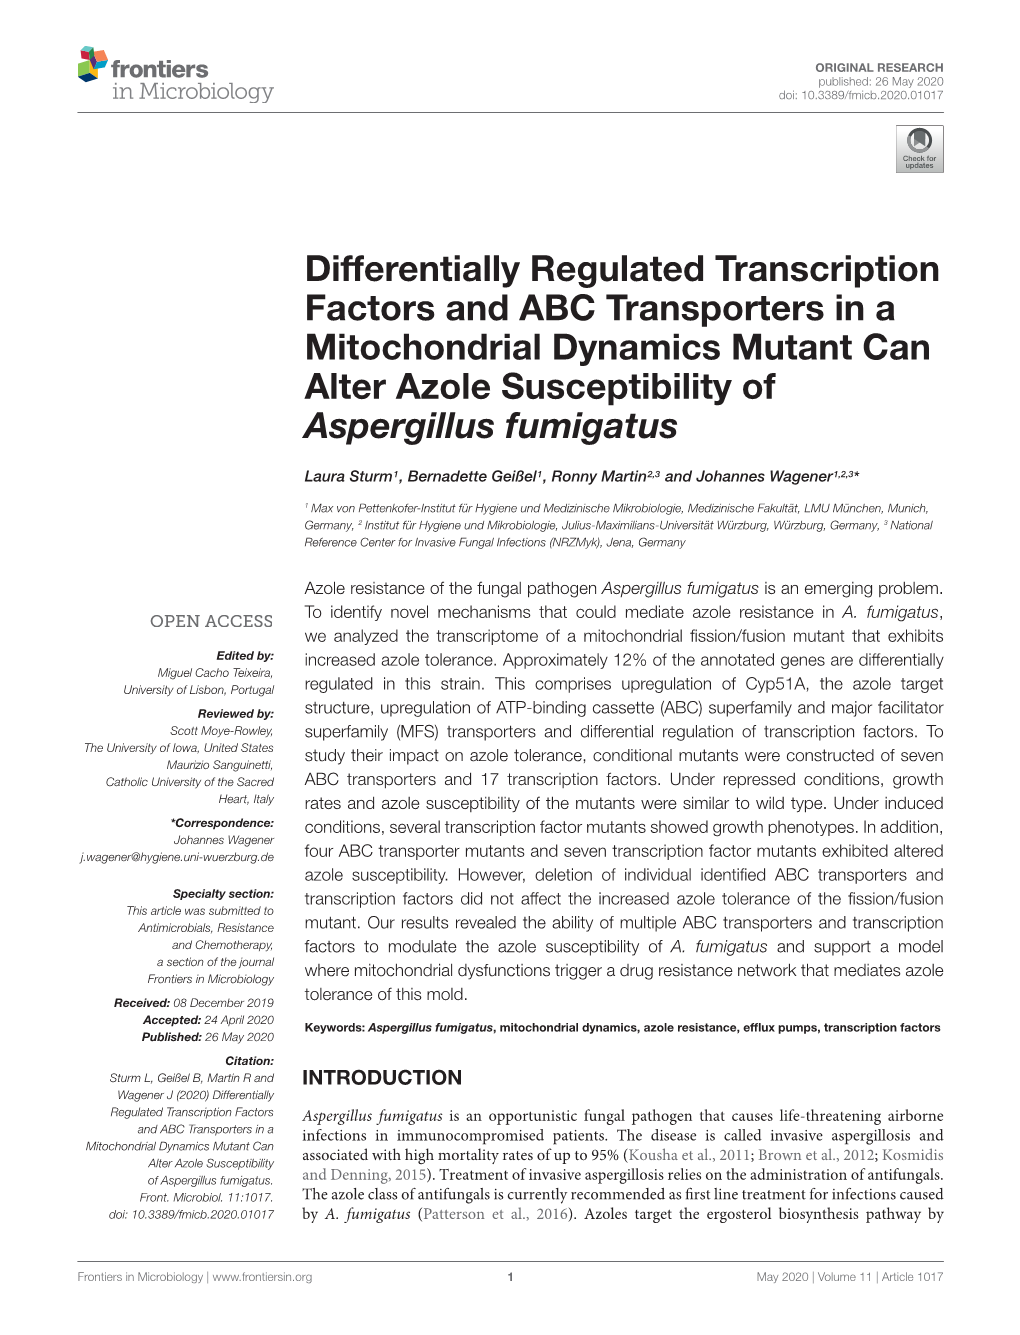 Differentially Regulated Transcription Factors and ABC Transporters in a Mitochondrial Dynamics Mutant Can Alter Azole Susceptibility of Aspergillus Fumigatus